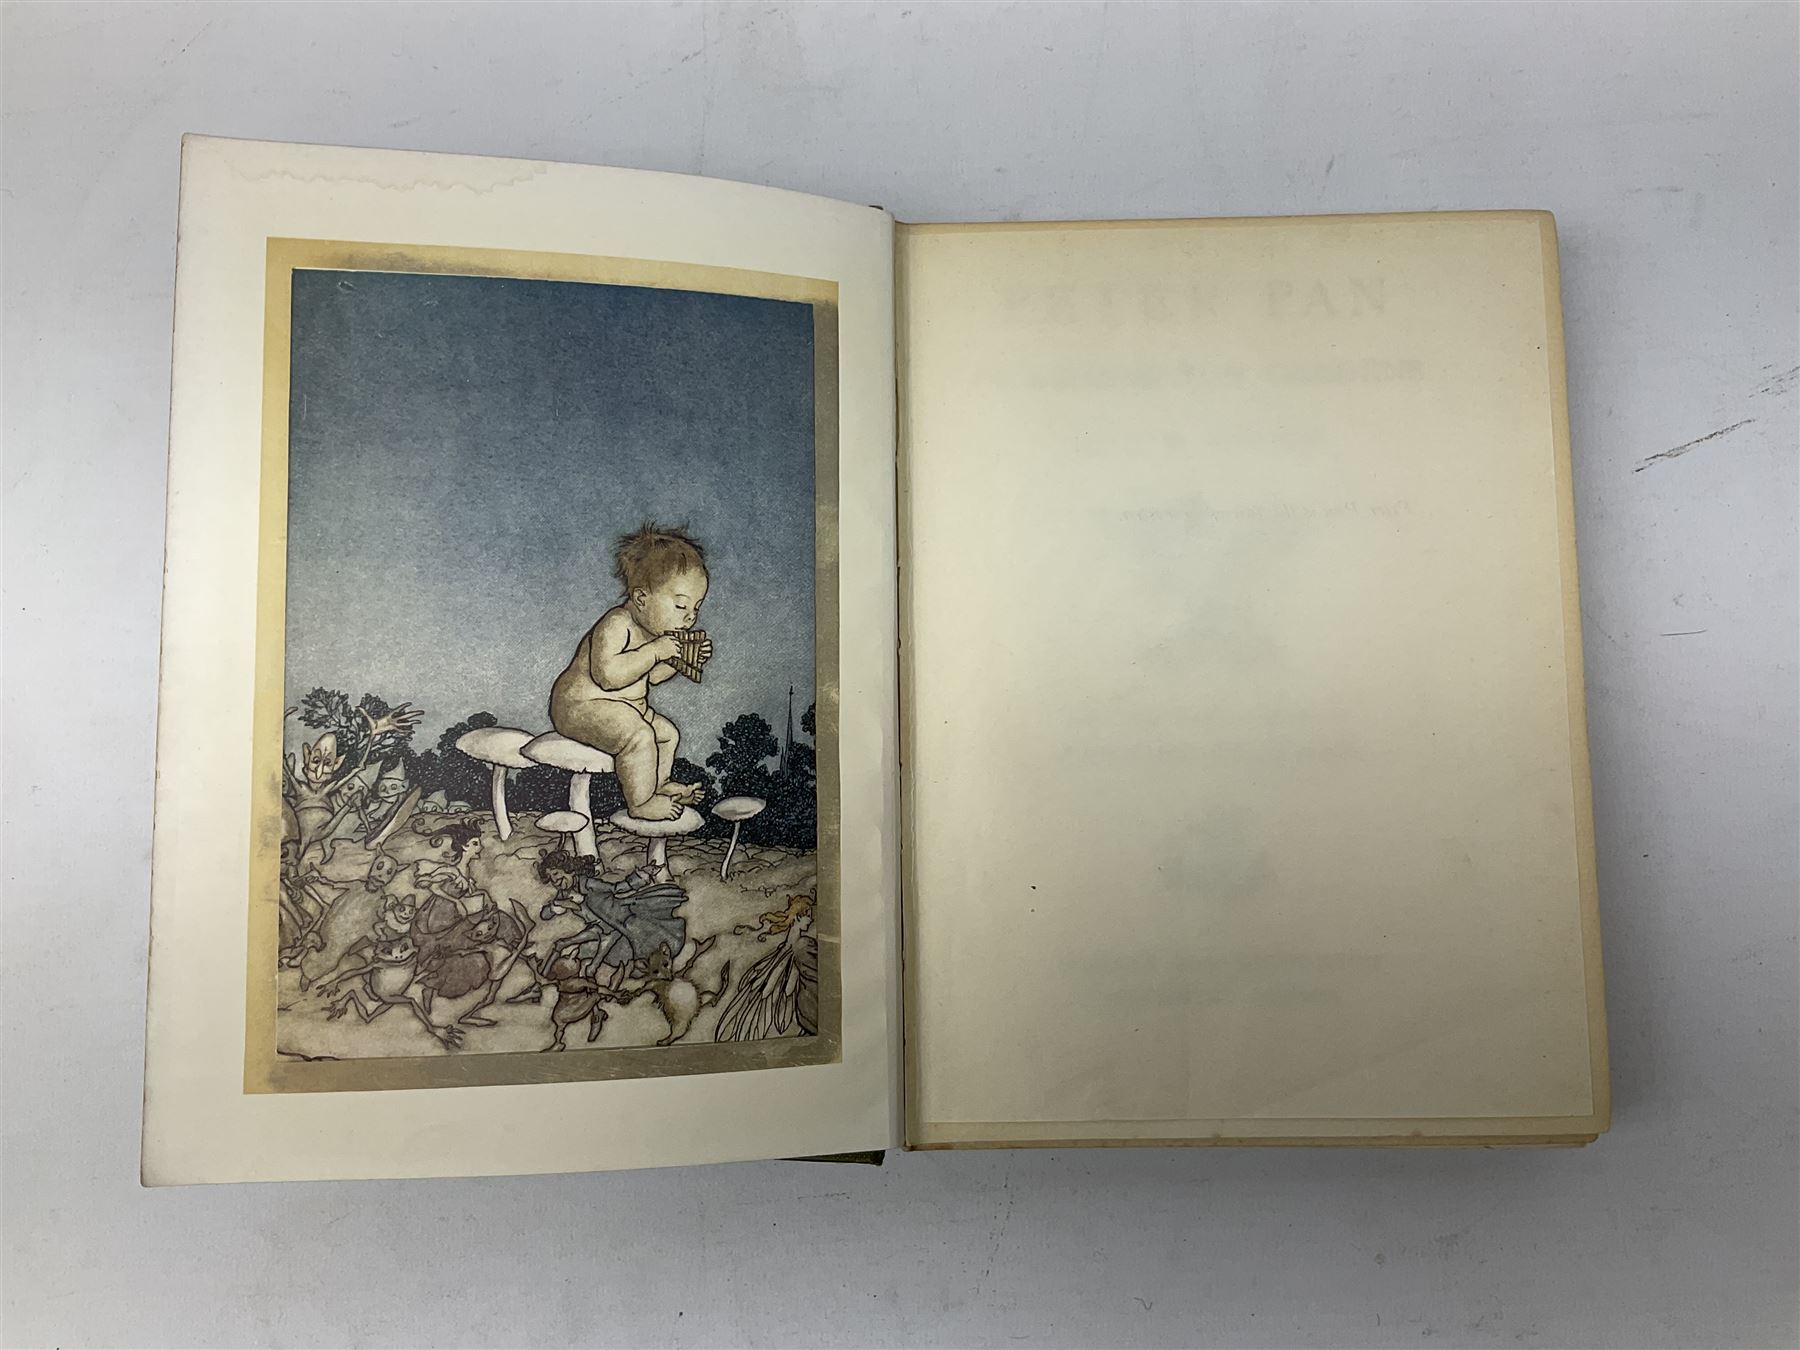 G A. A'Beckett: The comic history of England by with coloured etchings and woodcuts by John Leech a - Image 9 of 11